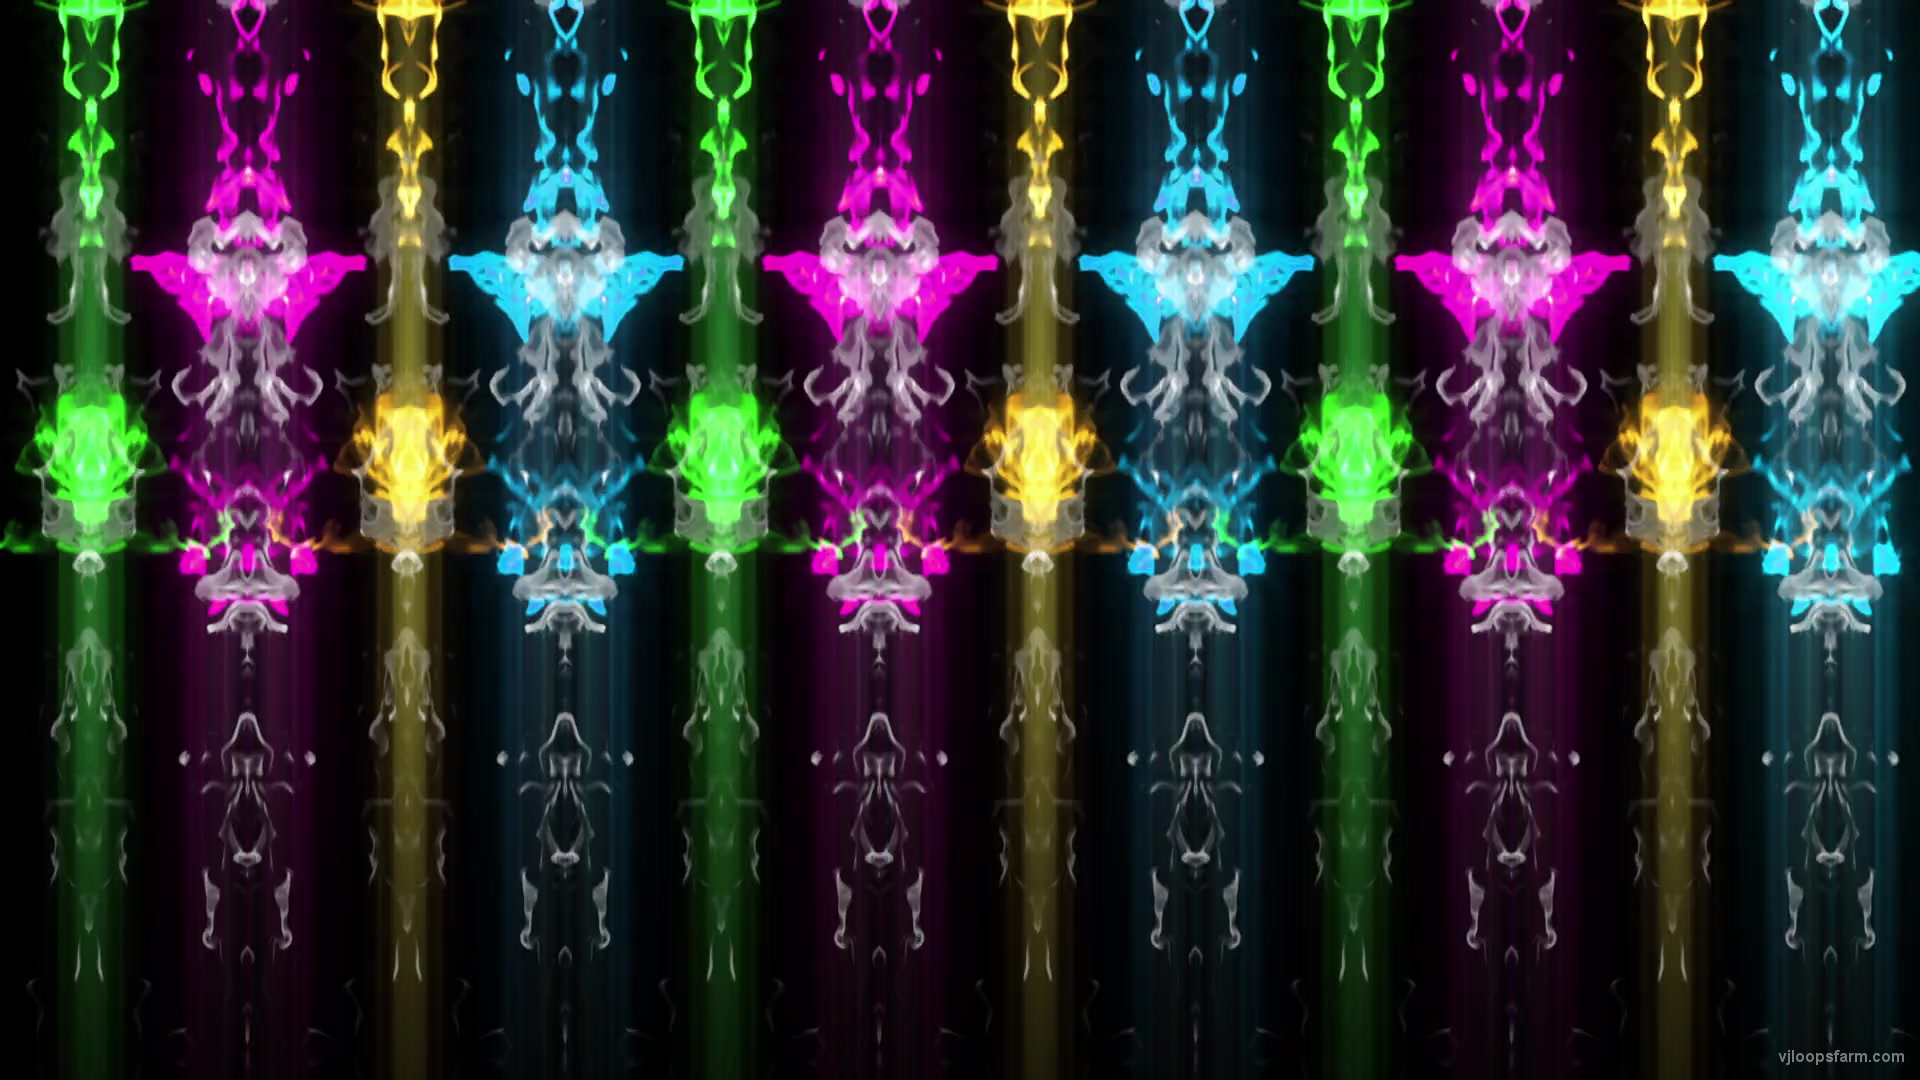 Download Razer wallpapers, virtual backgrounds, and videos